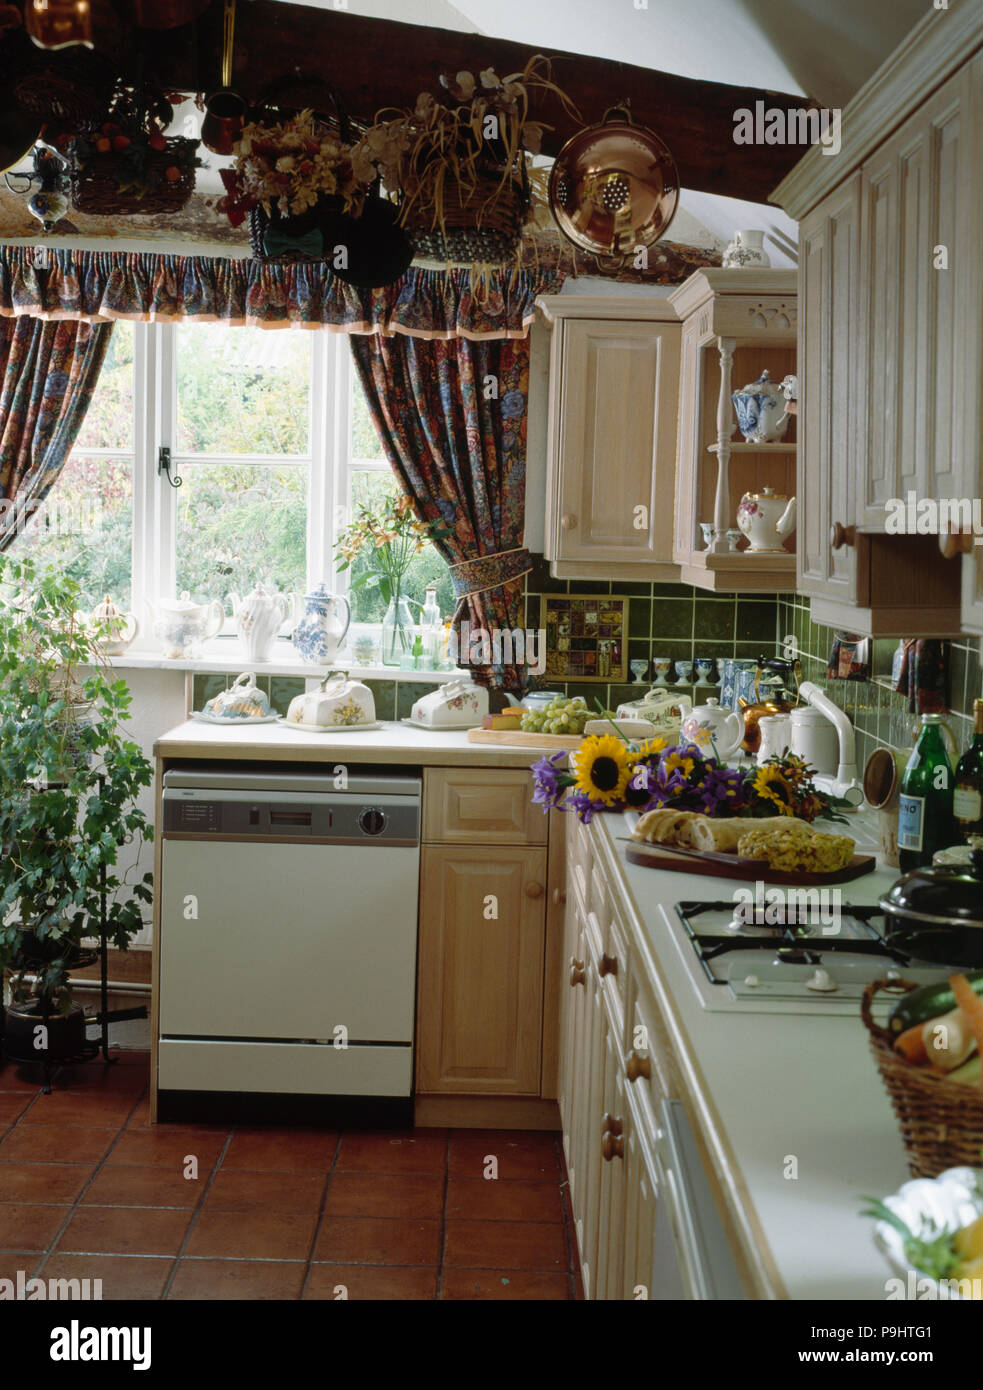 Fitted dishwasher below window in cluttered cottage kitchen Stock Photo